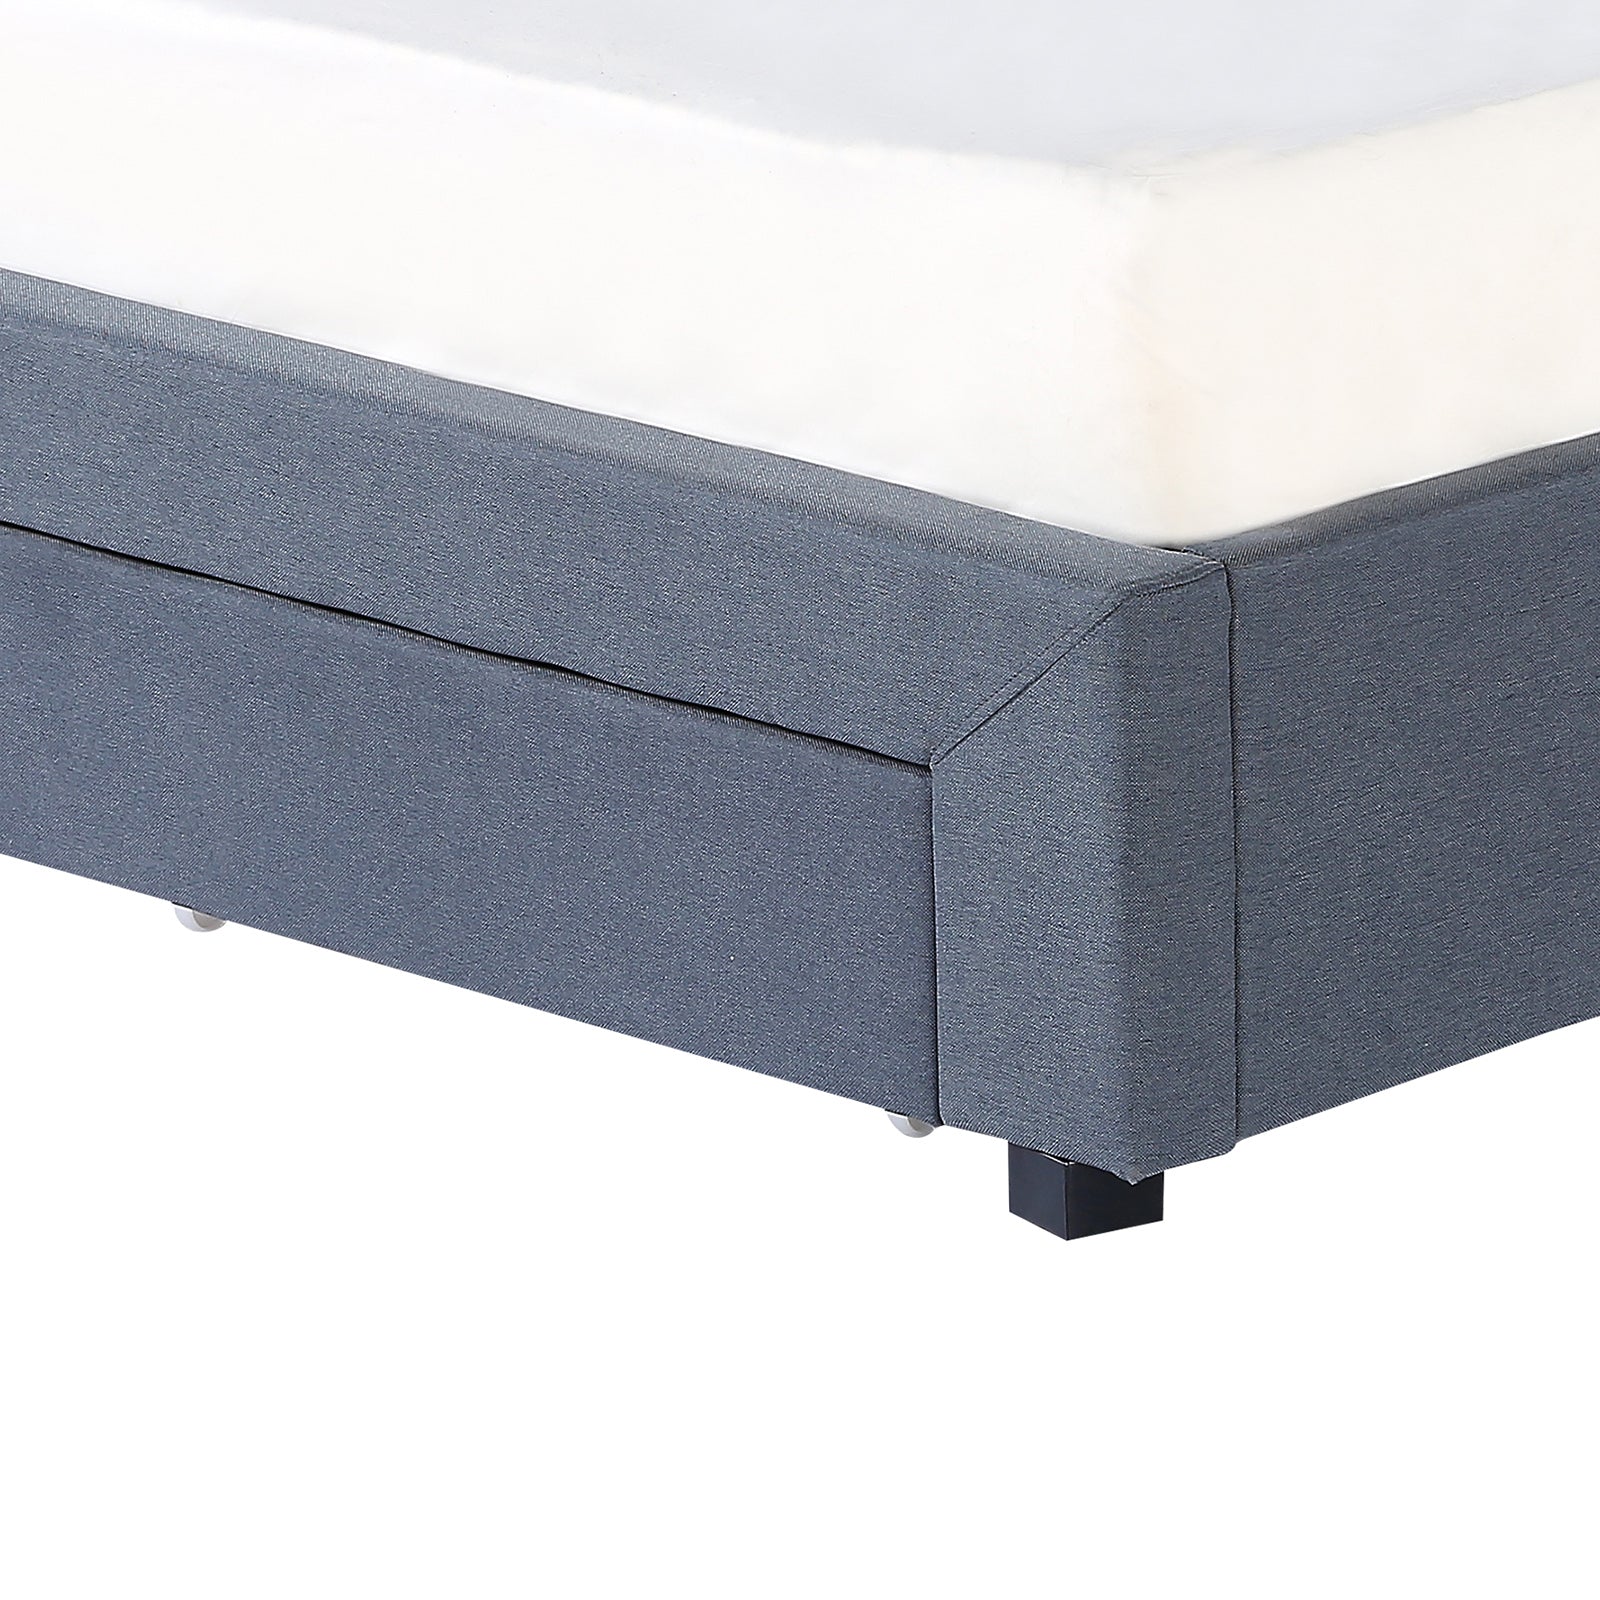 Milano Decor Palermo Bed Base with Drawers Upholstered Fabric Wood Charcoal - Queen - Charcoal